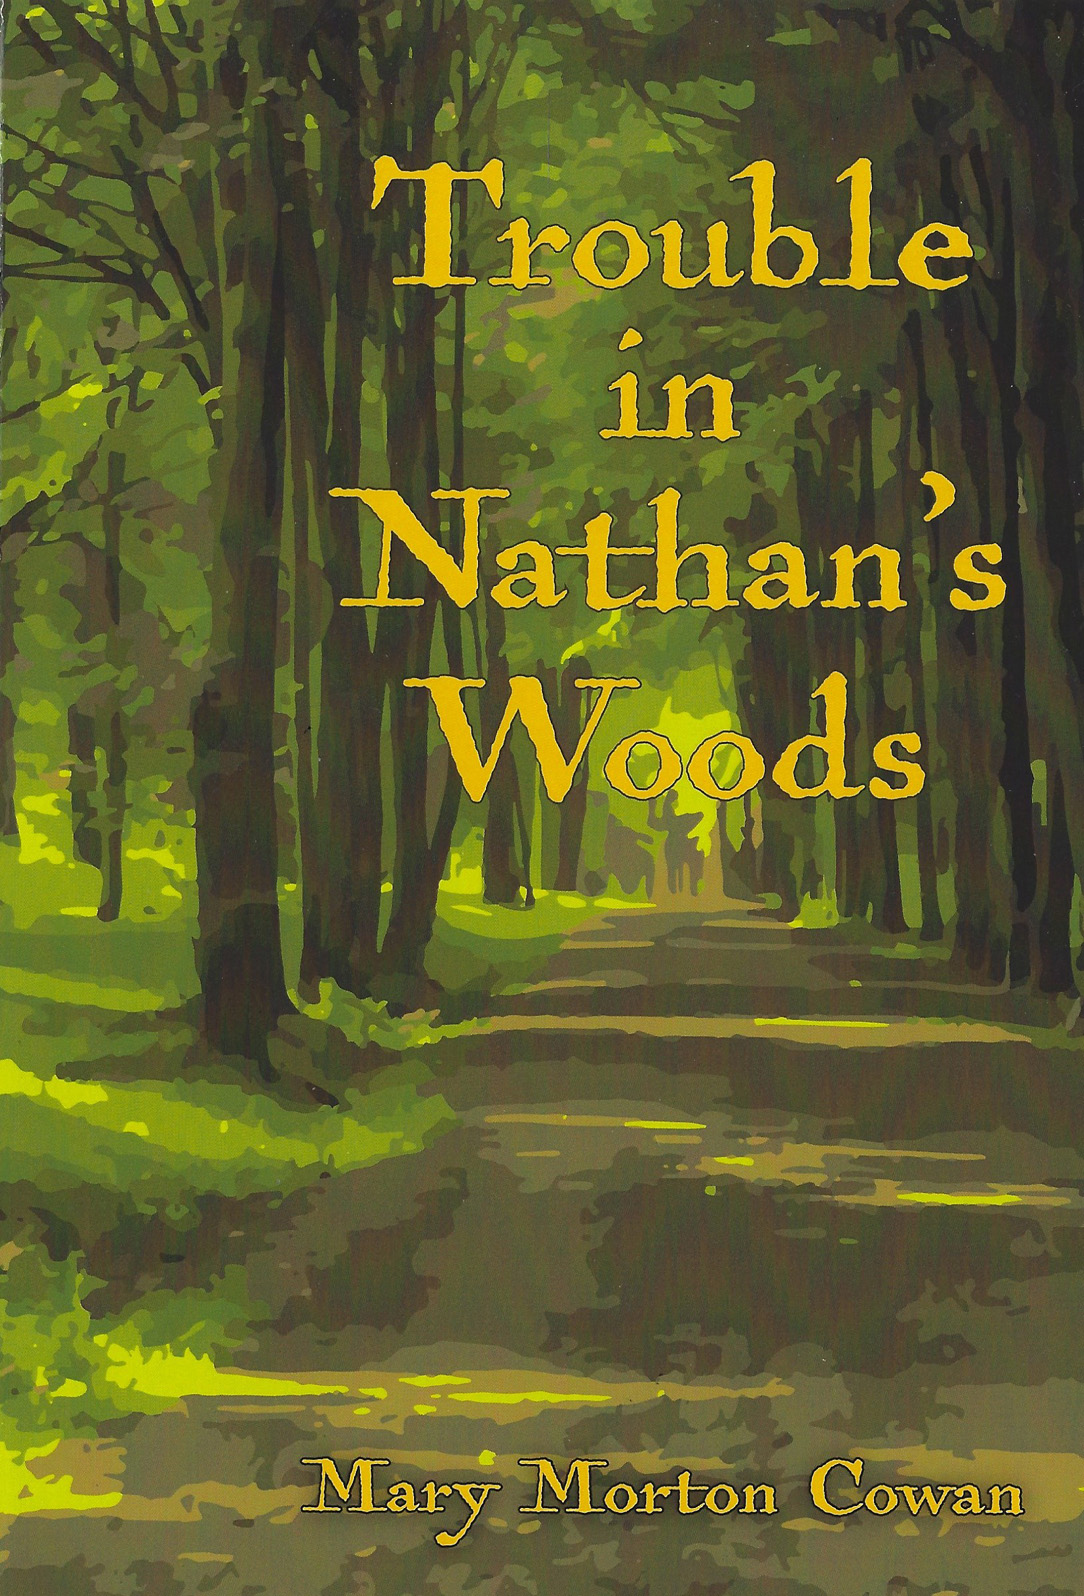 Trouble in Nathan's Woods book cover